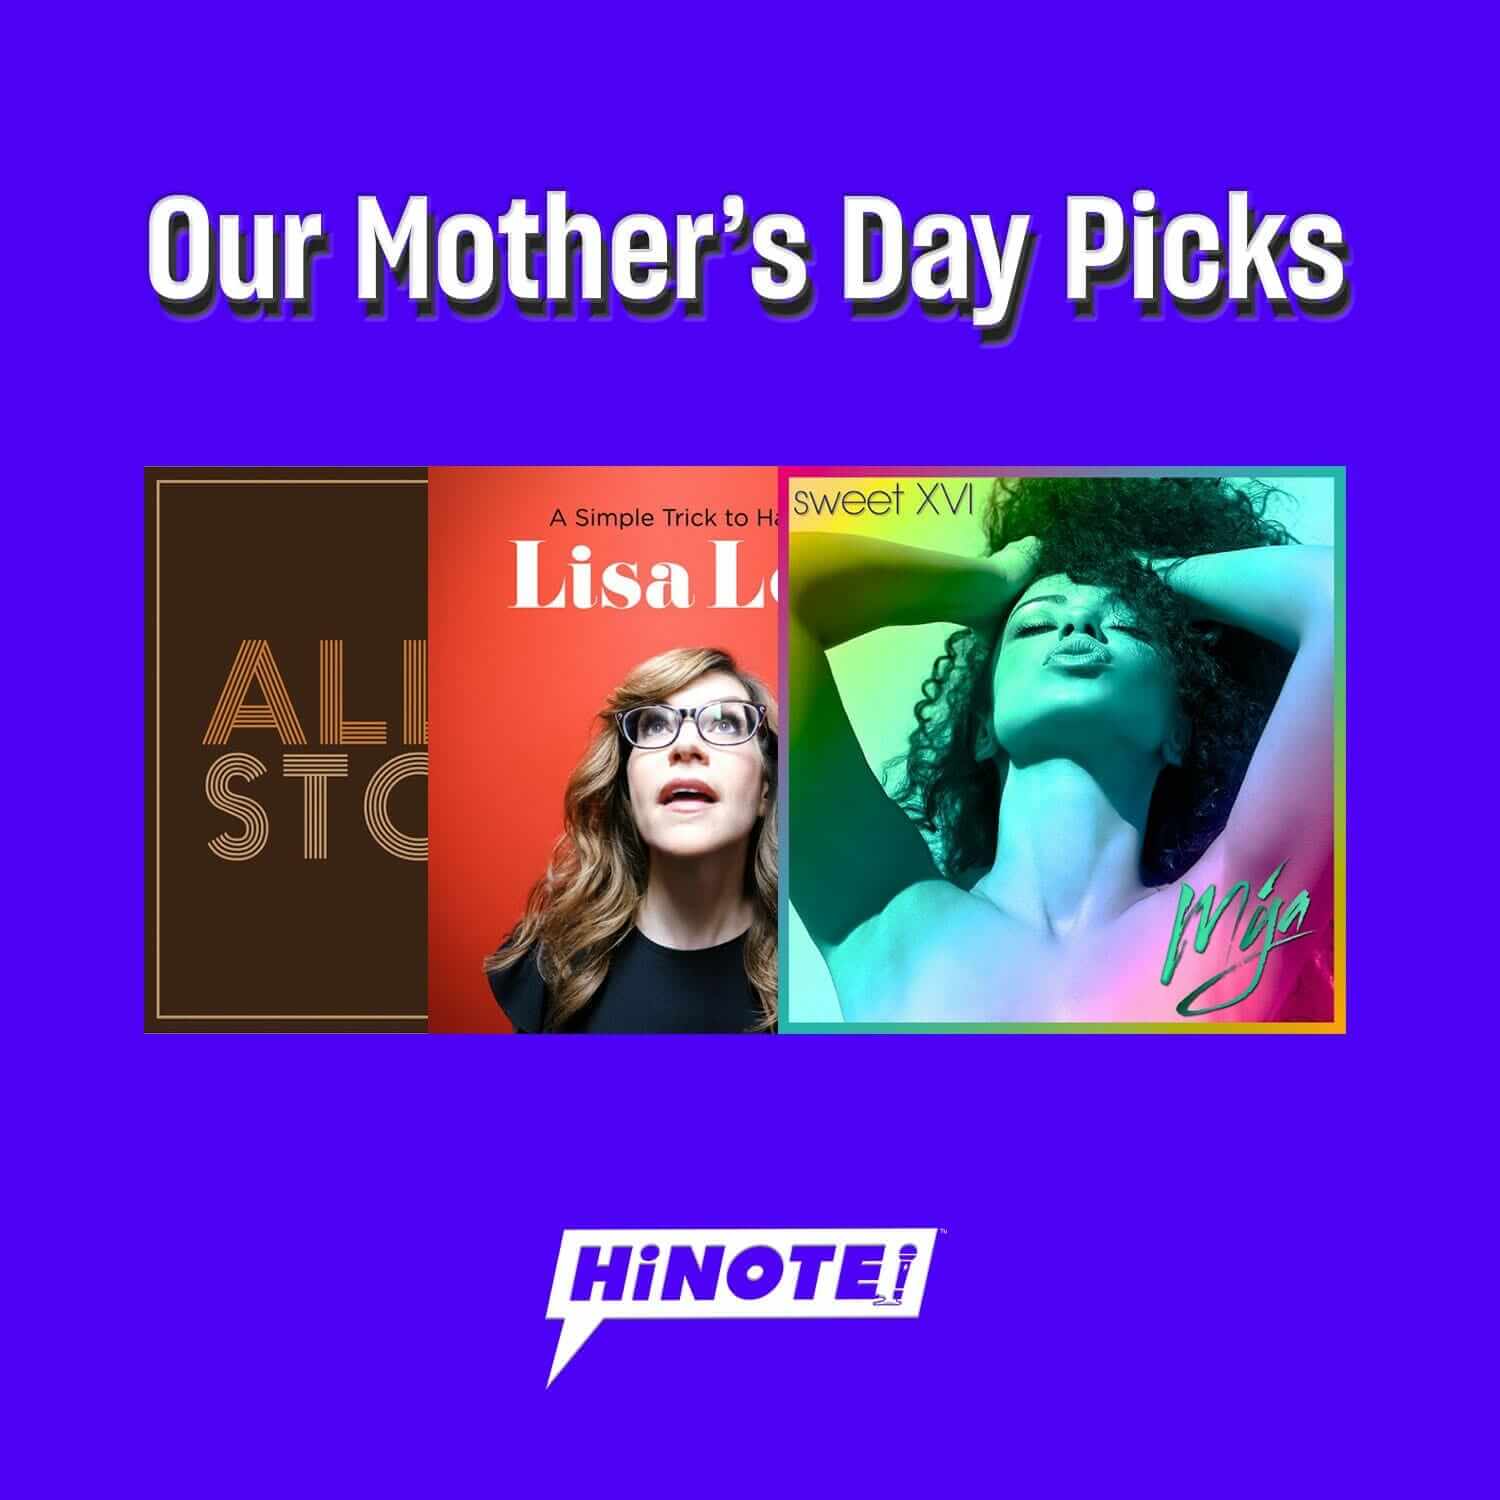 Our Mother’s Day Picks